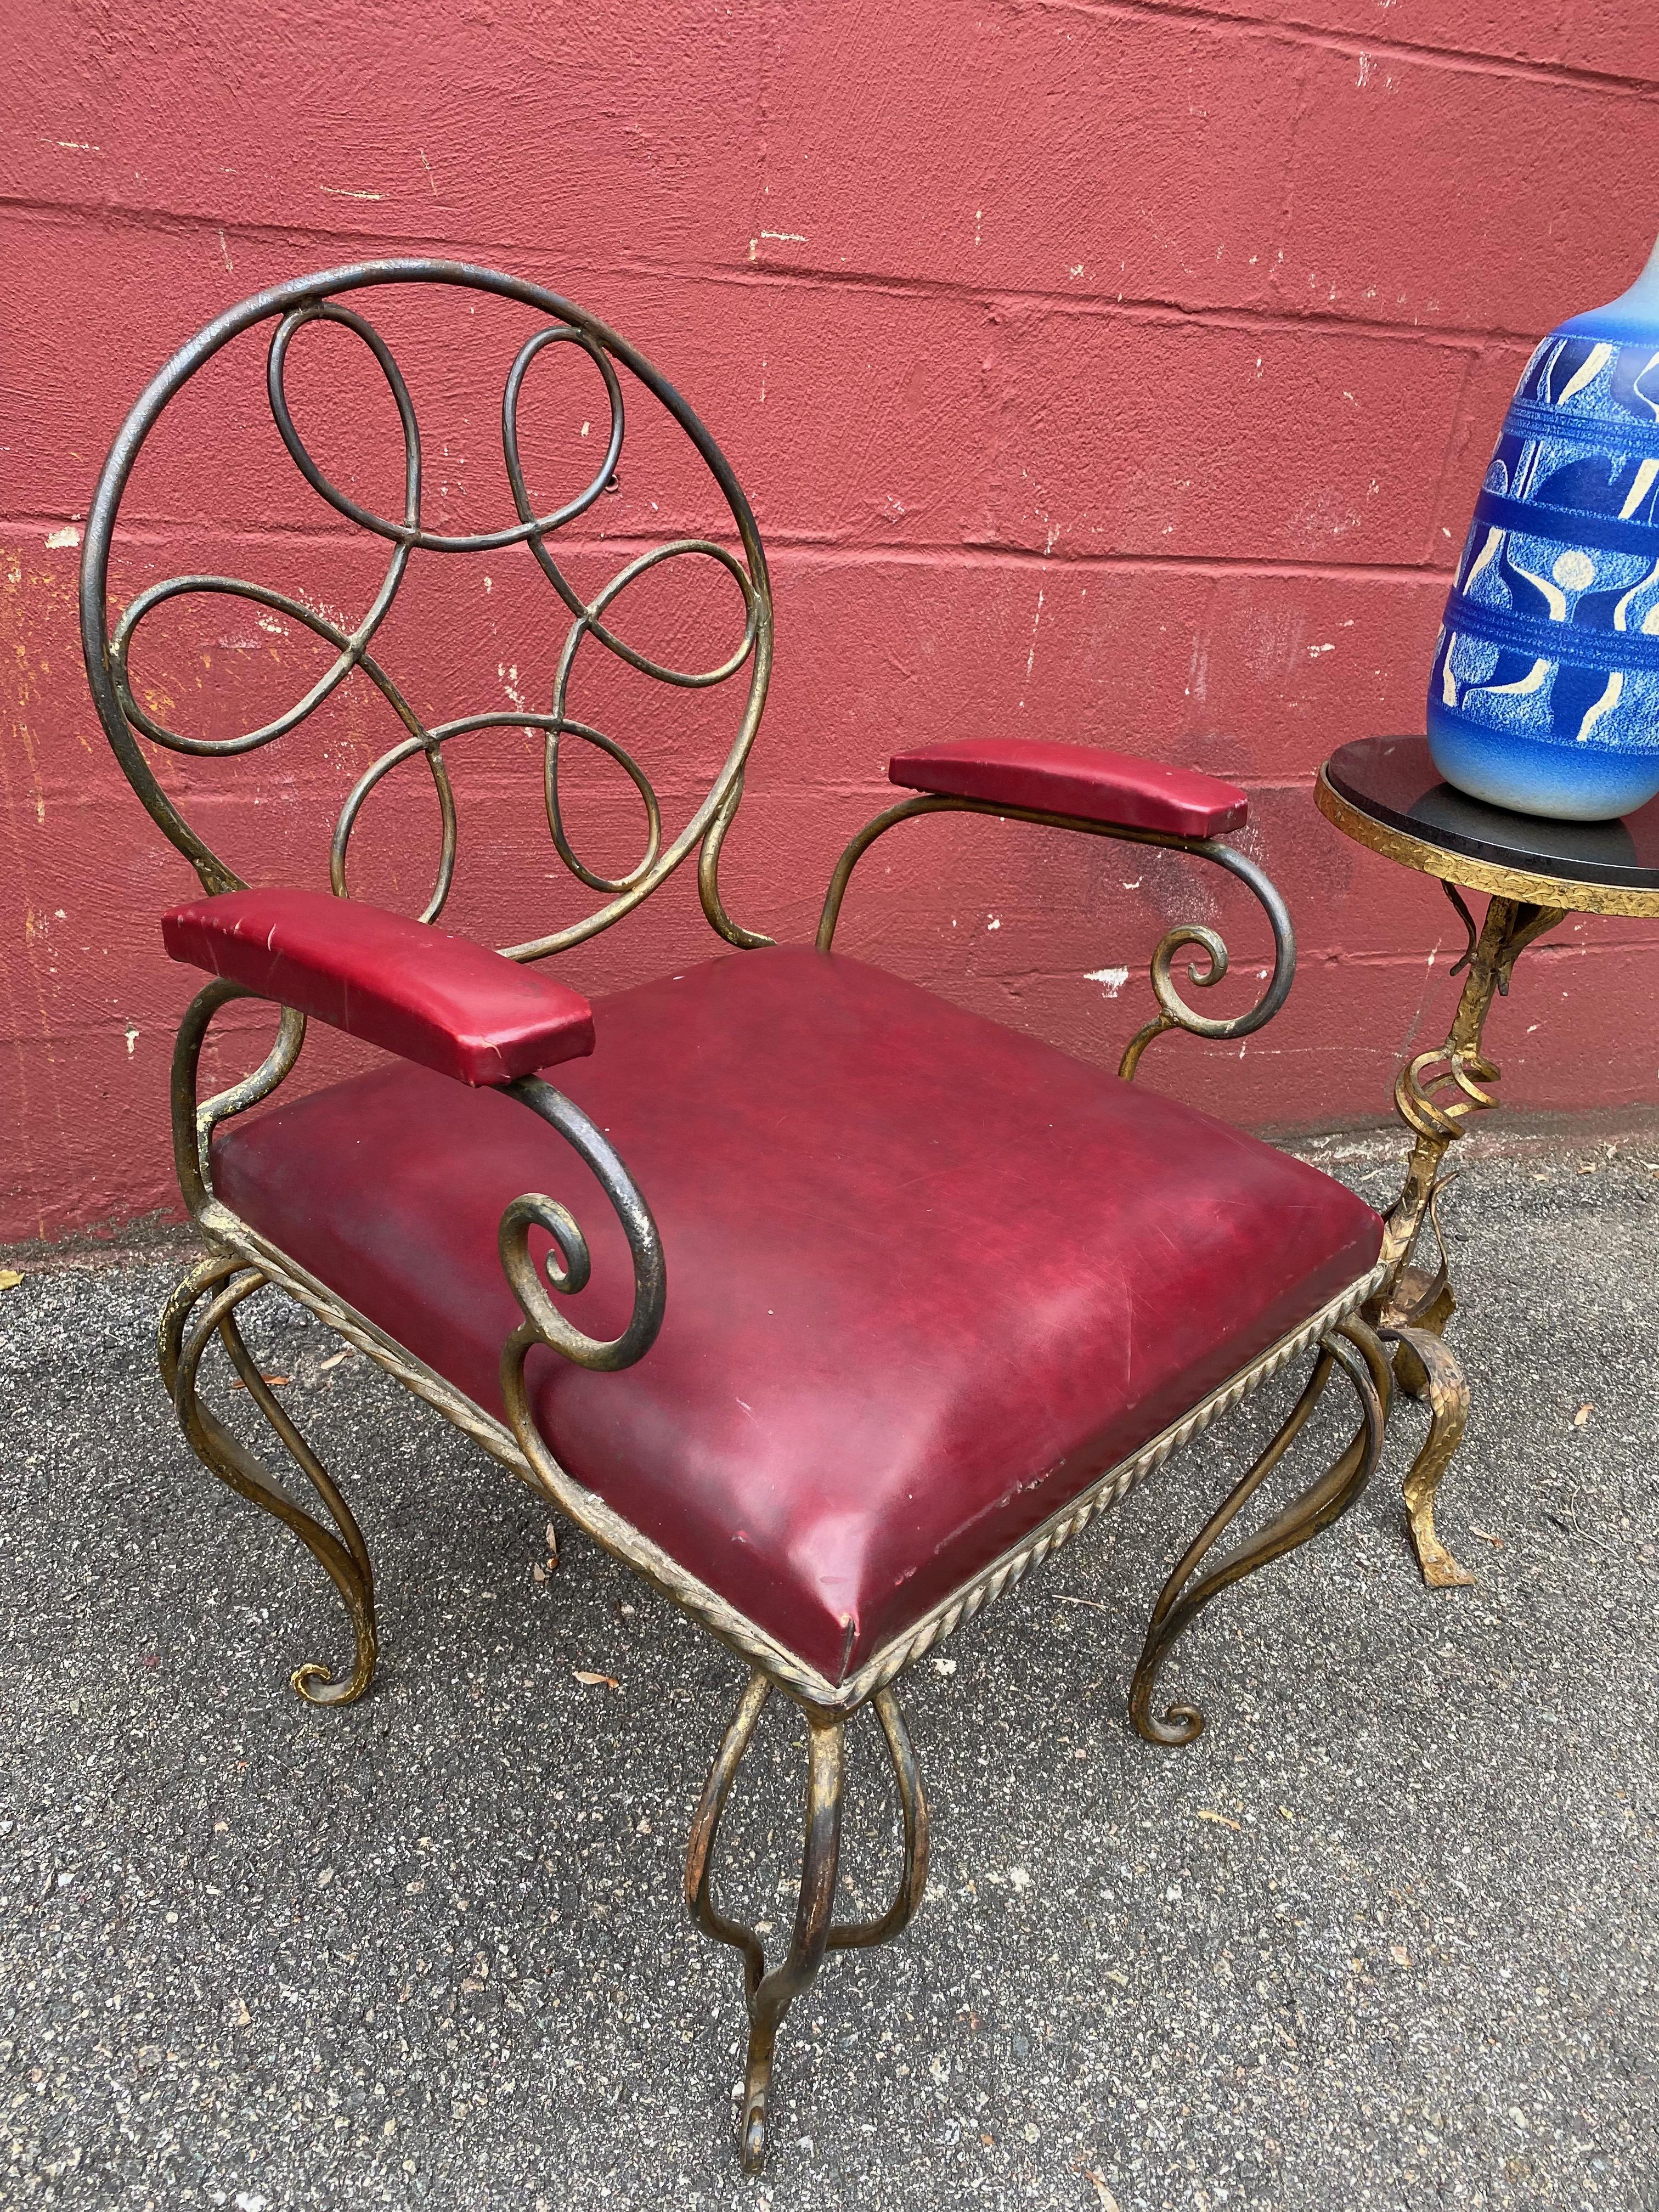 Ornate Wrought Iron Armchair in Oxblood Red Vinyl For Sale 8